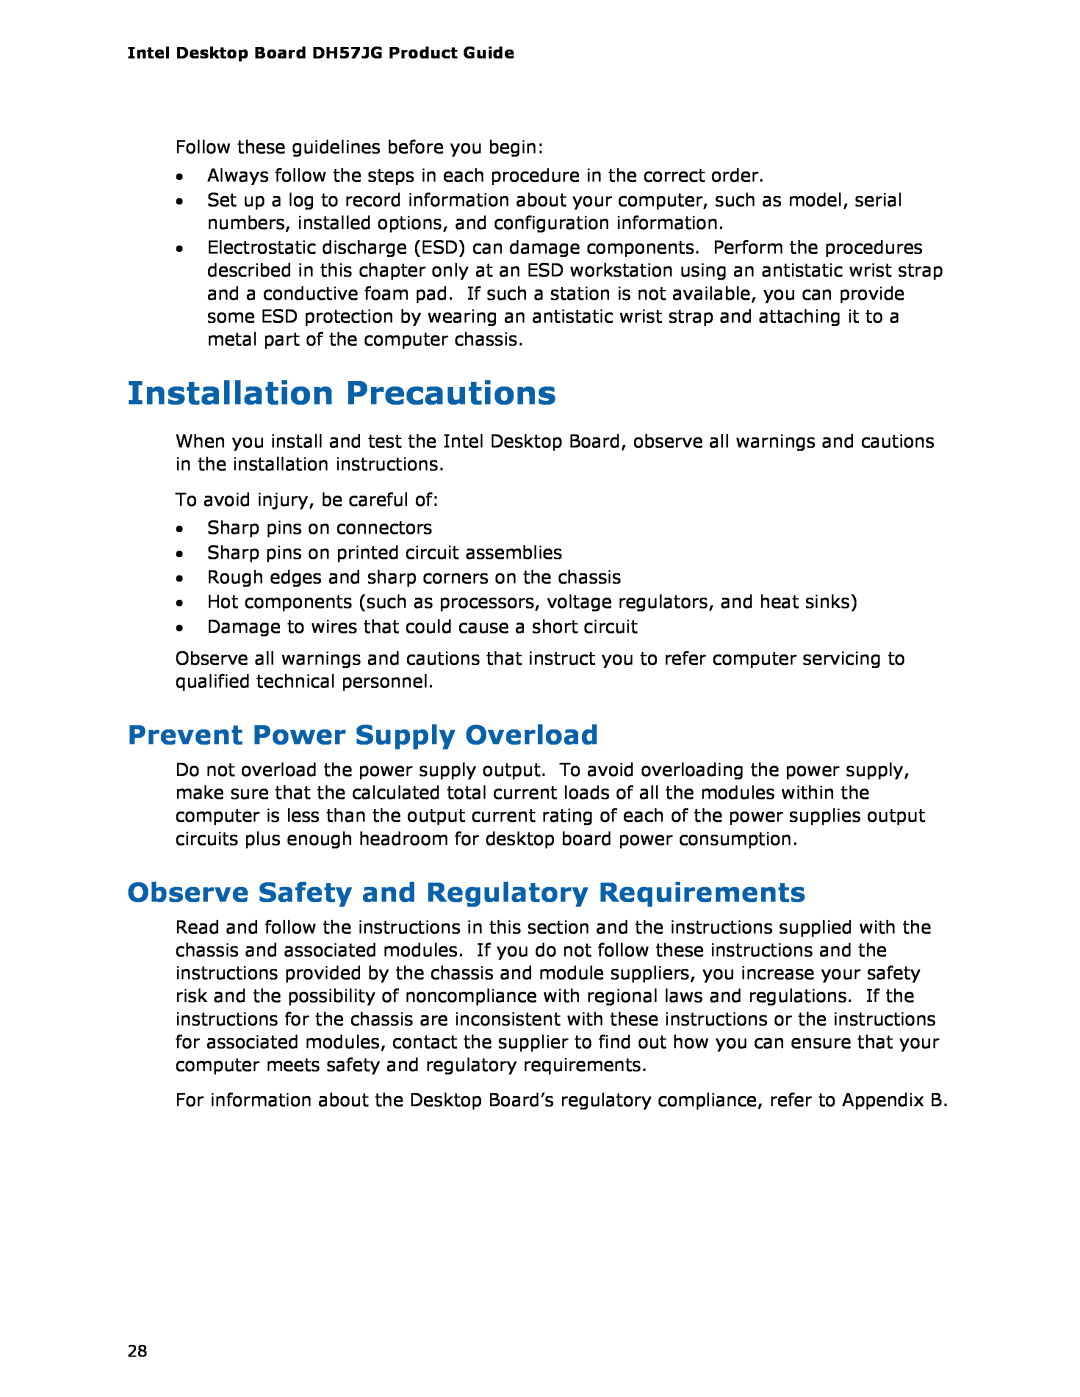 Intel BLKDH57JG manual Installation Precautions, Prevent Power Supply Overload, Observe Safety and Regulatory Requirements 